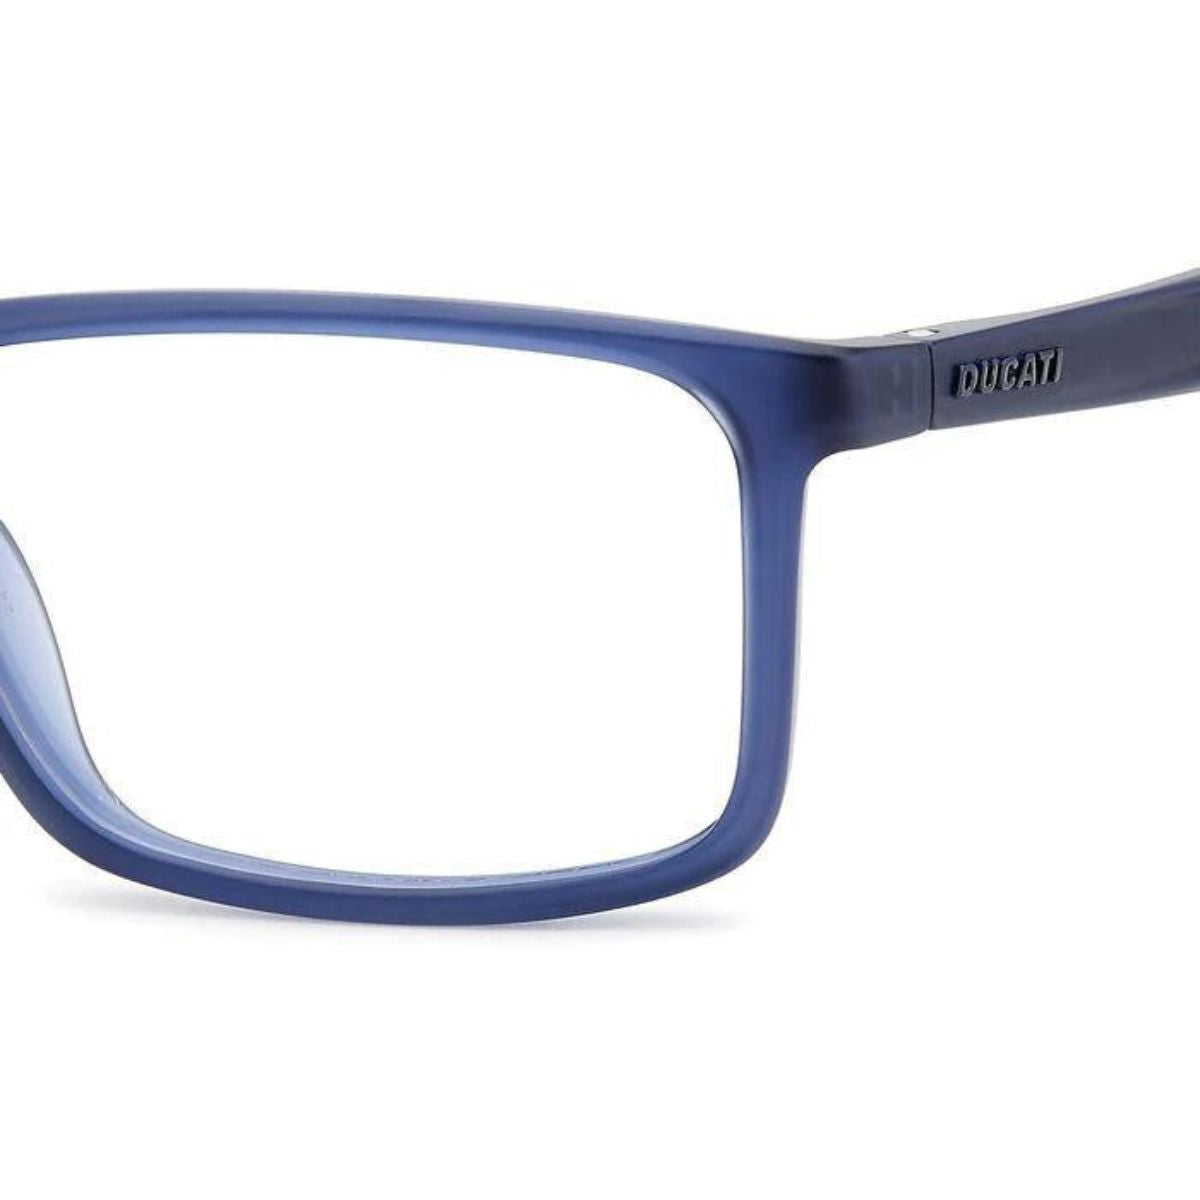 "Carrera CARDUC 024 FLL stylish square frame for men's at optorium"